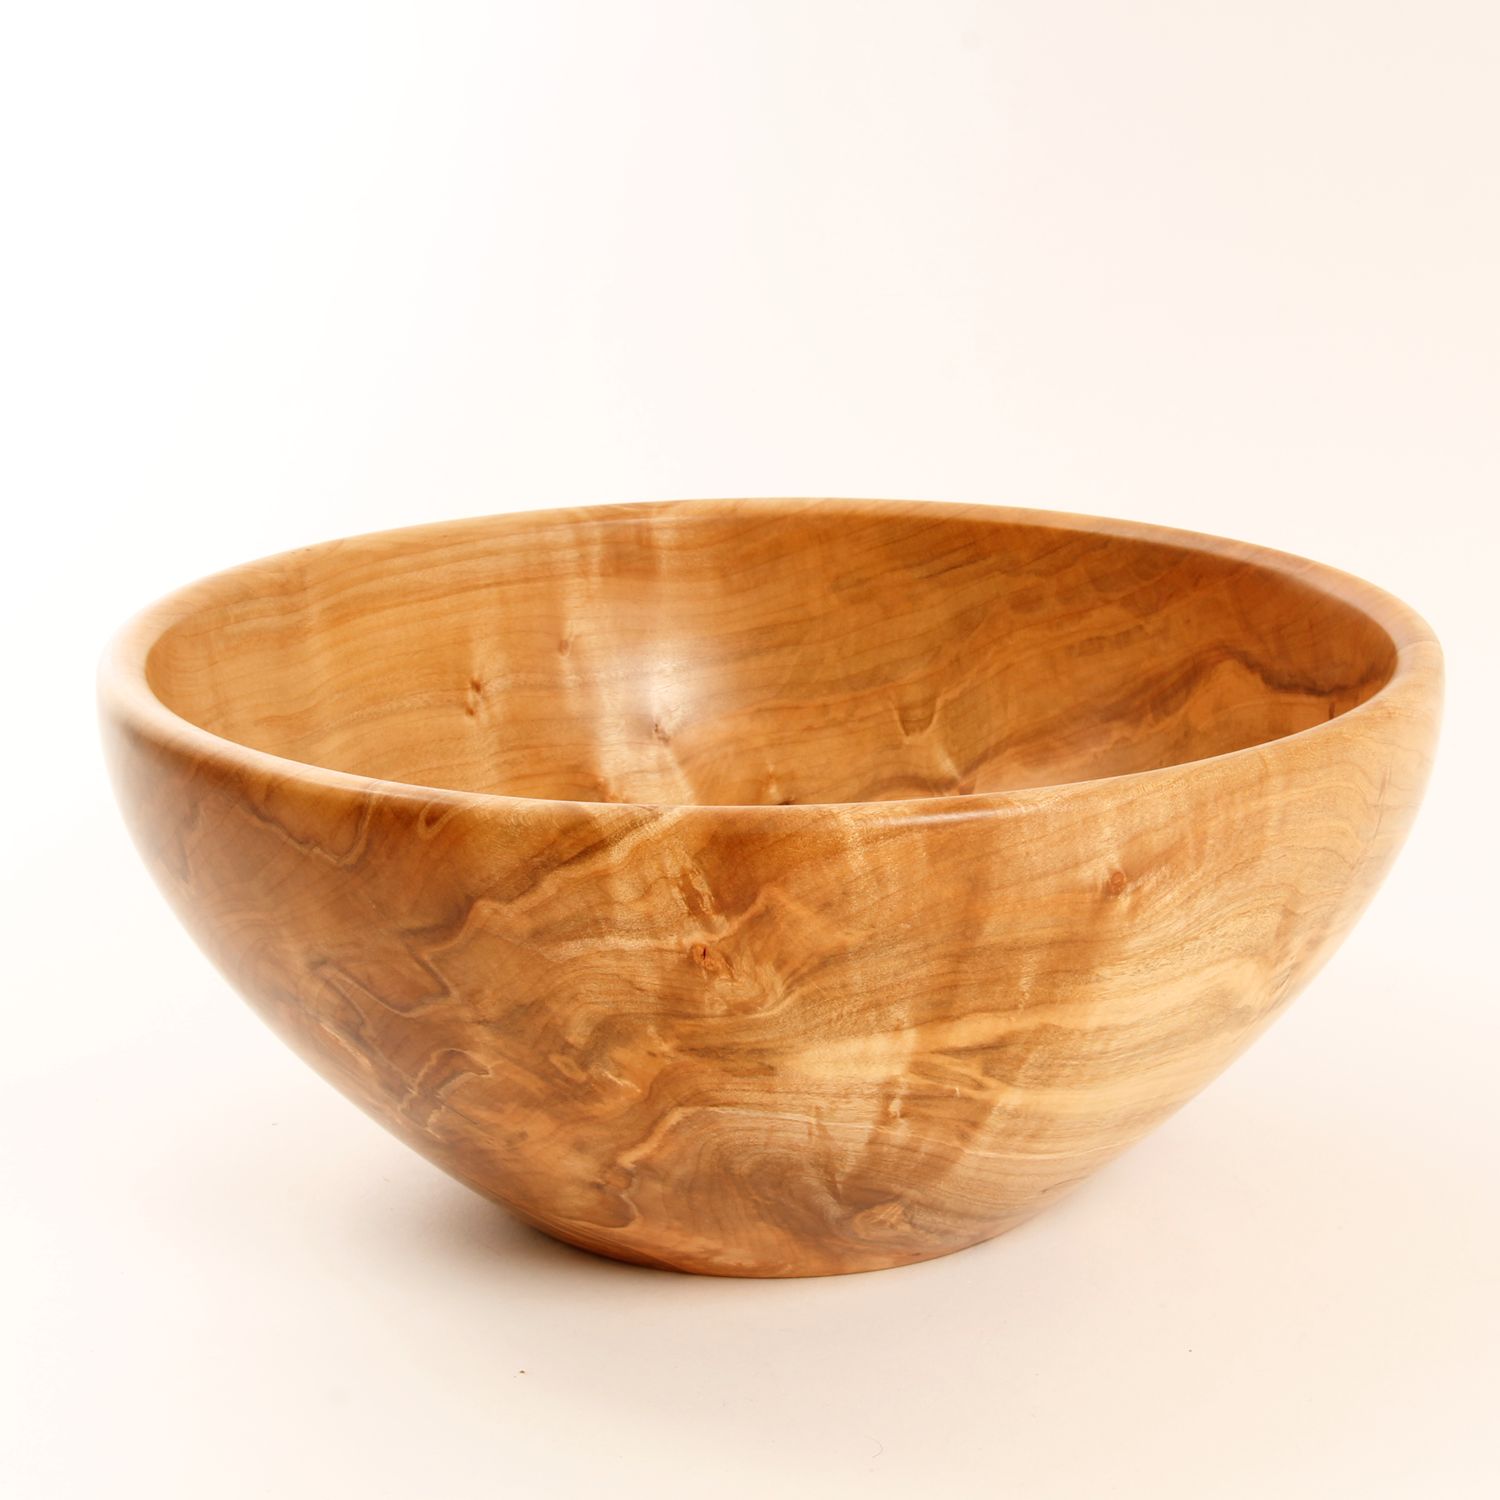 Michael Sbrocca: Large Maple Bowl Product Image 1 of 4